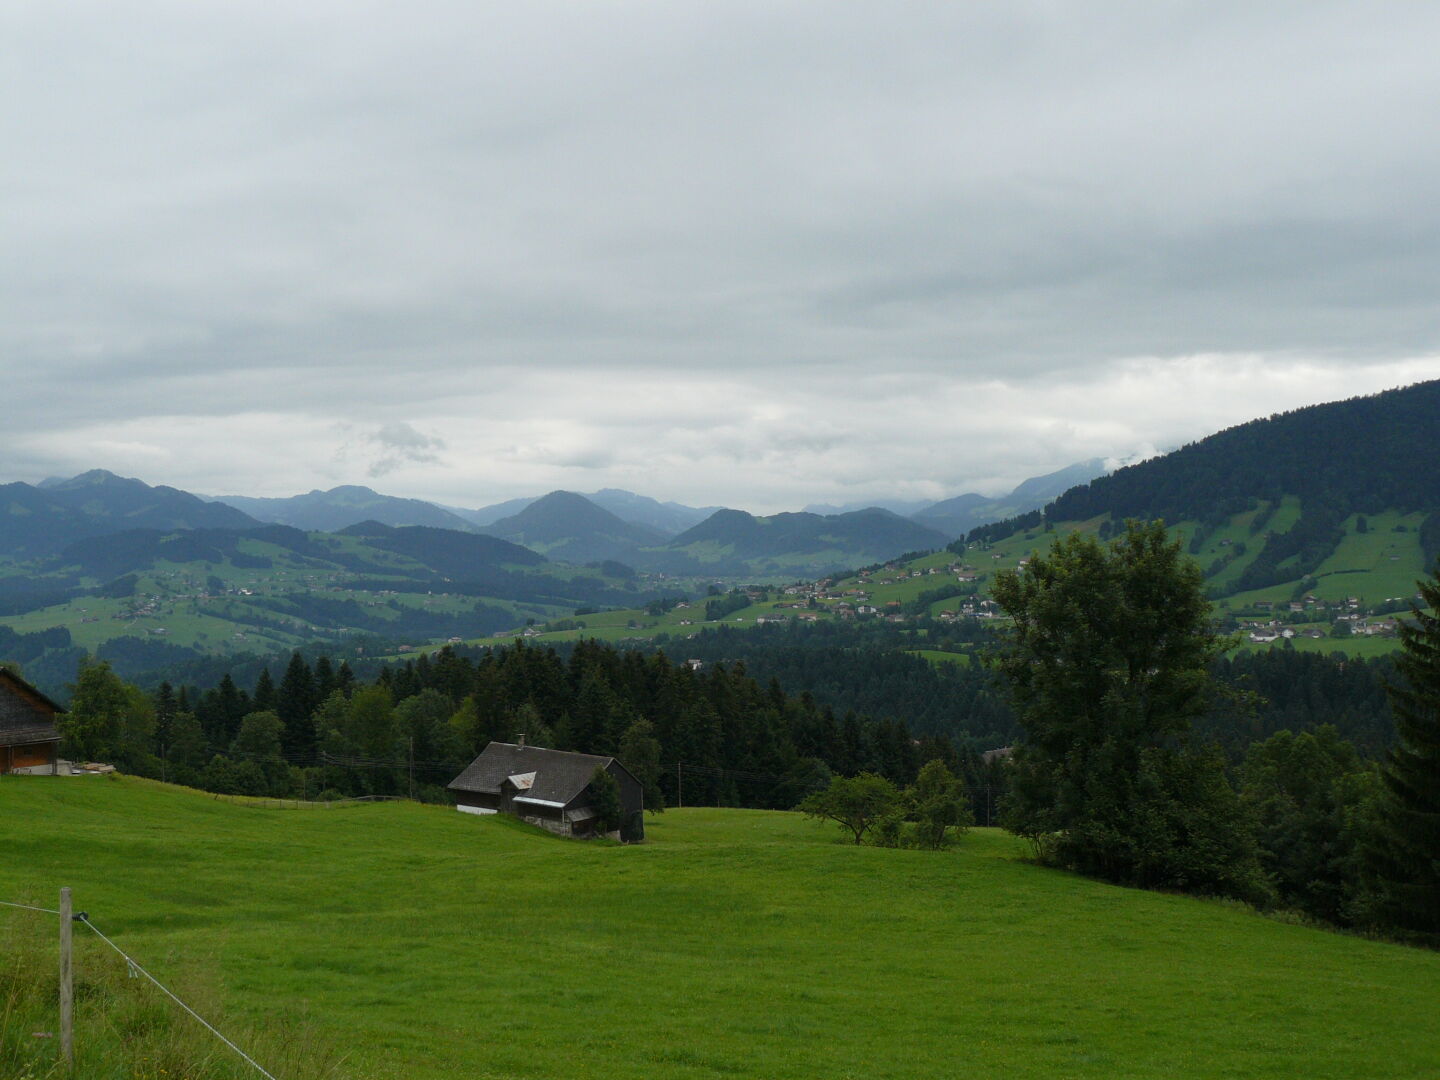 The Allgäuer Alps are not very high, but still pretty. Even in cloudy weather.